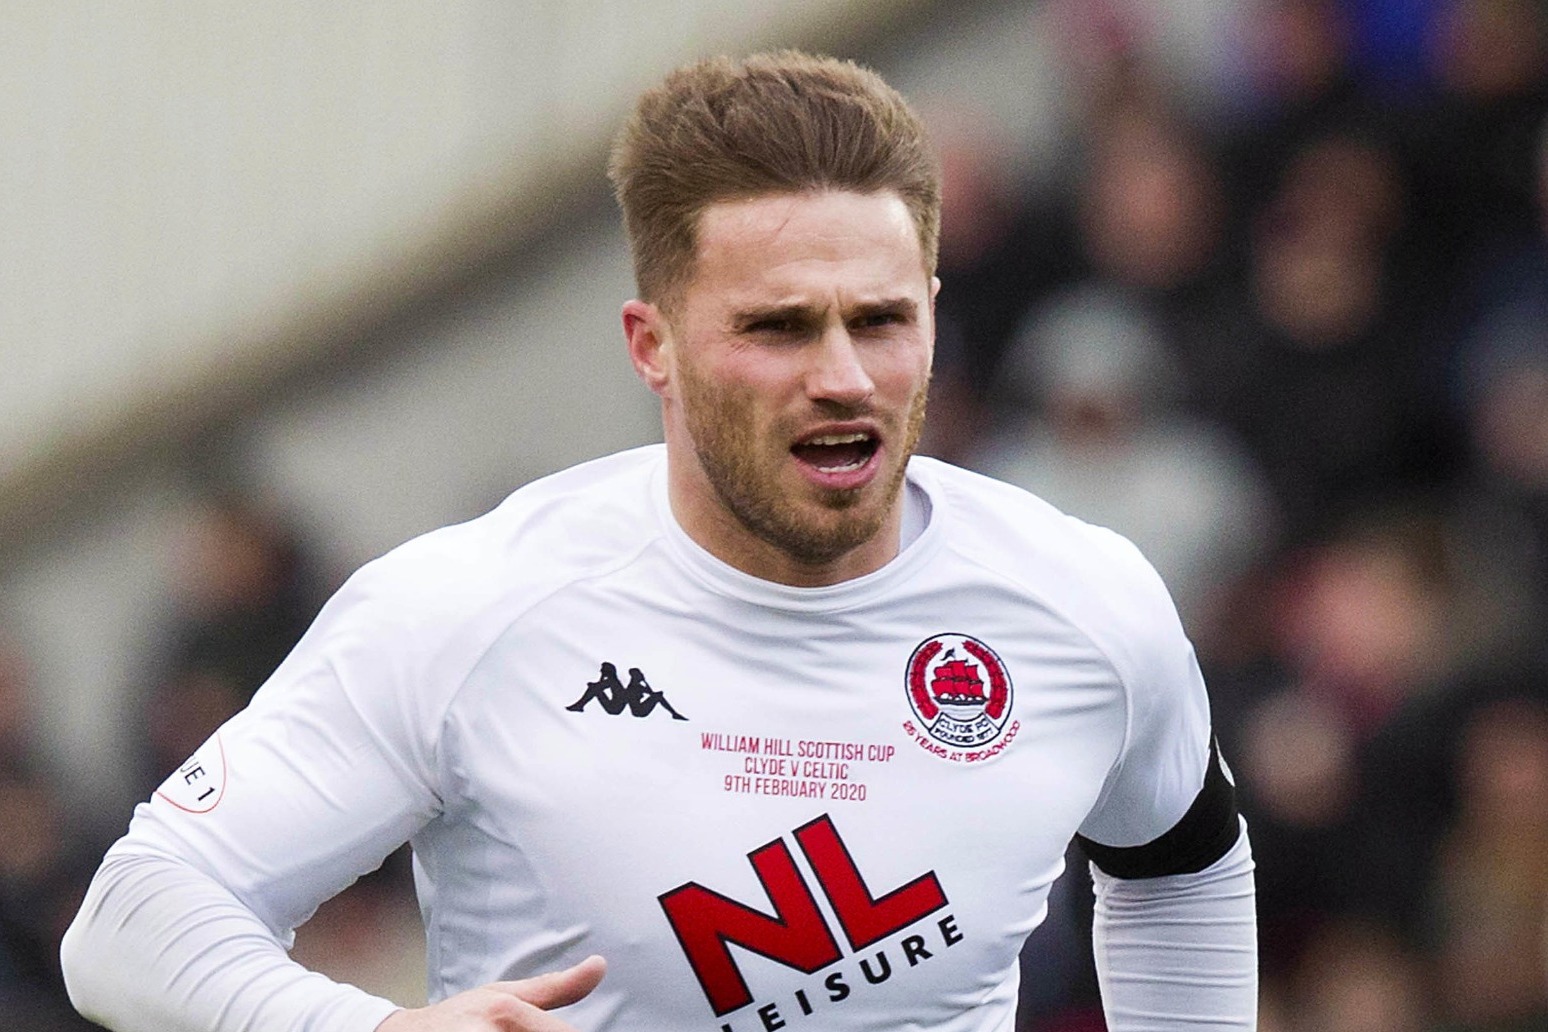 David Goodwillie has contract cancelled in Australia after backlash 